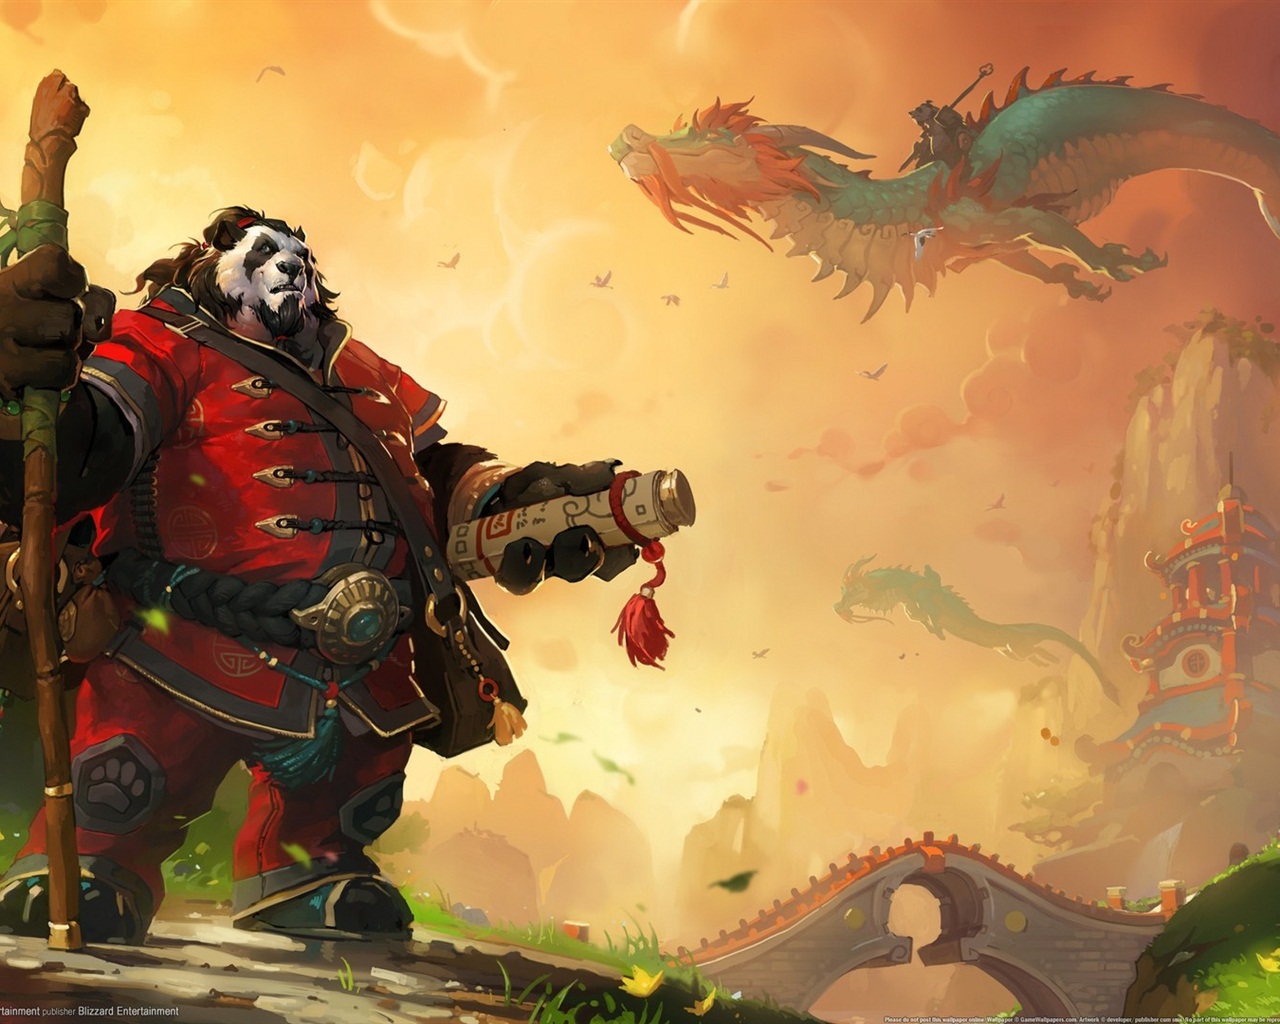 World of Warcraft: Mists of Pandaria HD wallpapers #12 - 1280x1024